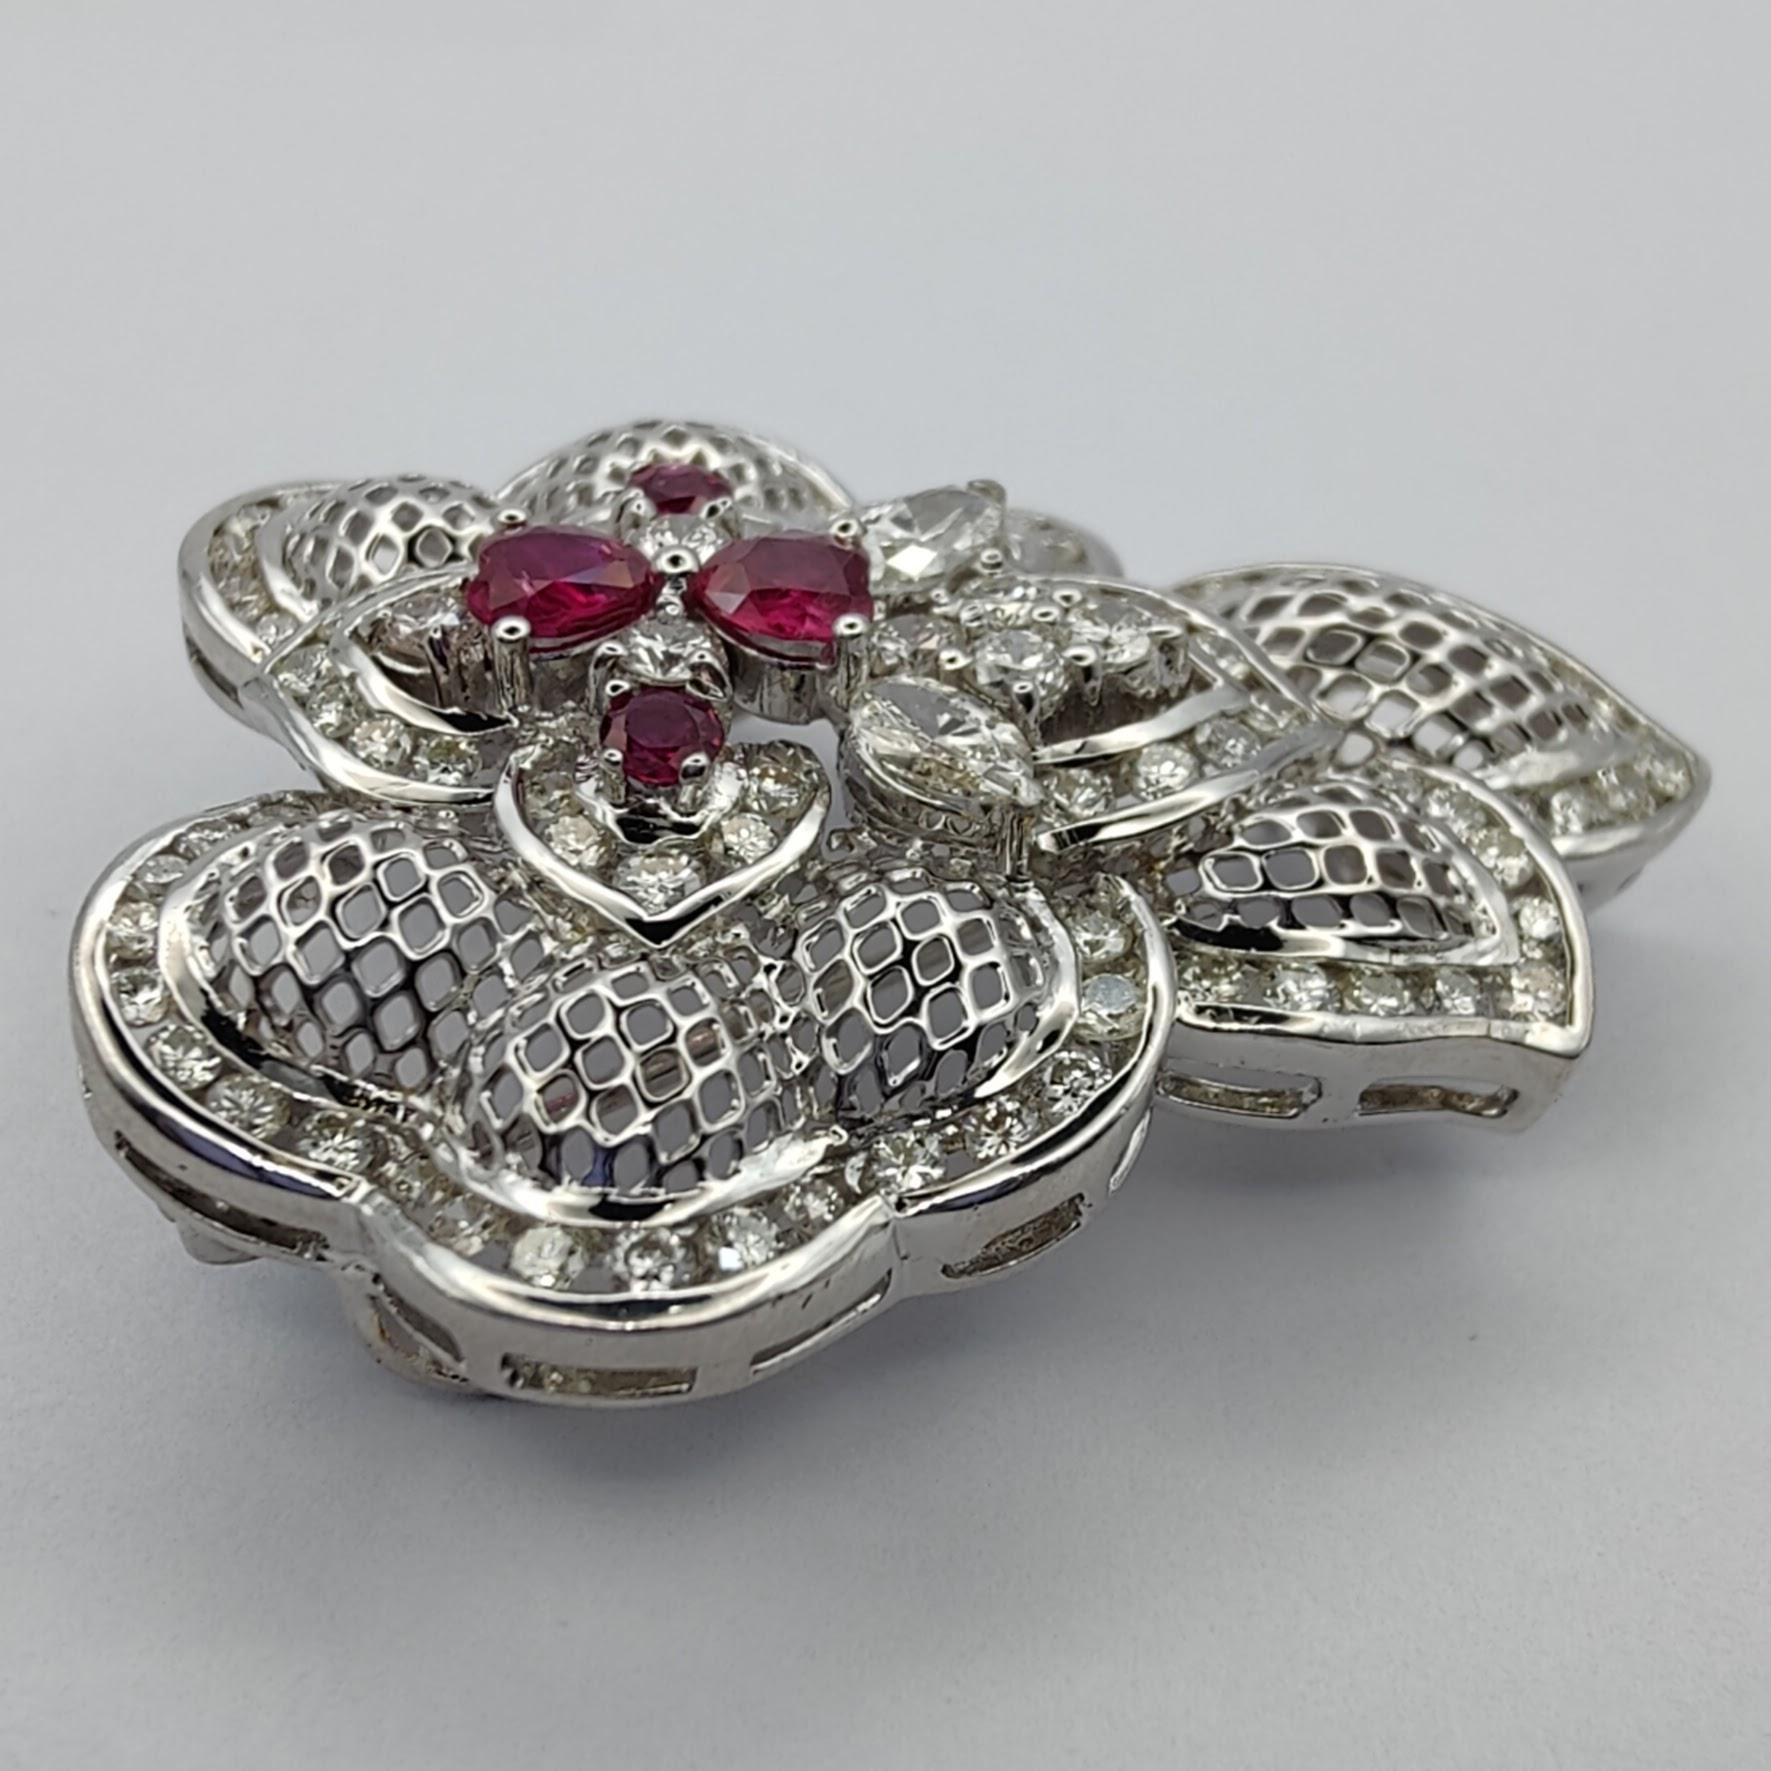 Baroque Revival Baroque 0.78 Carat Ruby and 2.7 Carat Diamond Pendant Brooch in 18k White Gold For Sale